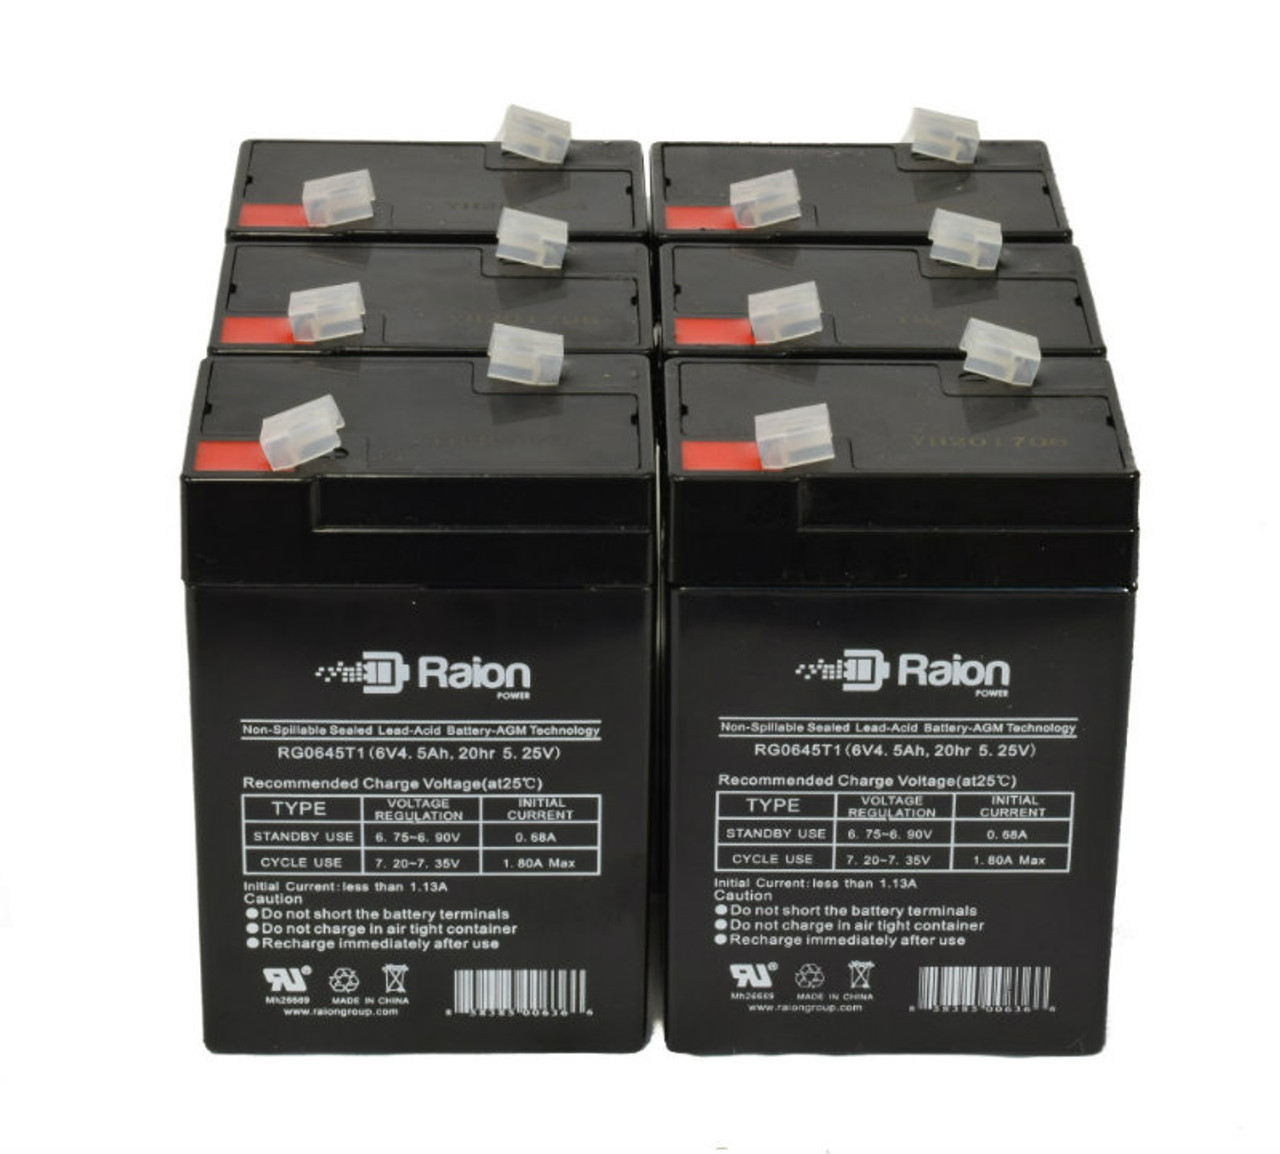 Raion Power 6 Volt 4.5Ah RG0645T1 Replacement Battery for Power Rite PRB64 - 6 Pack